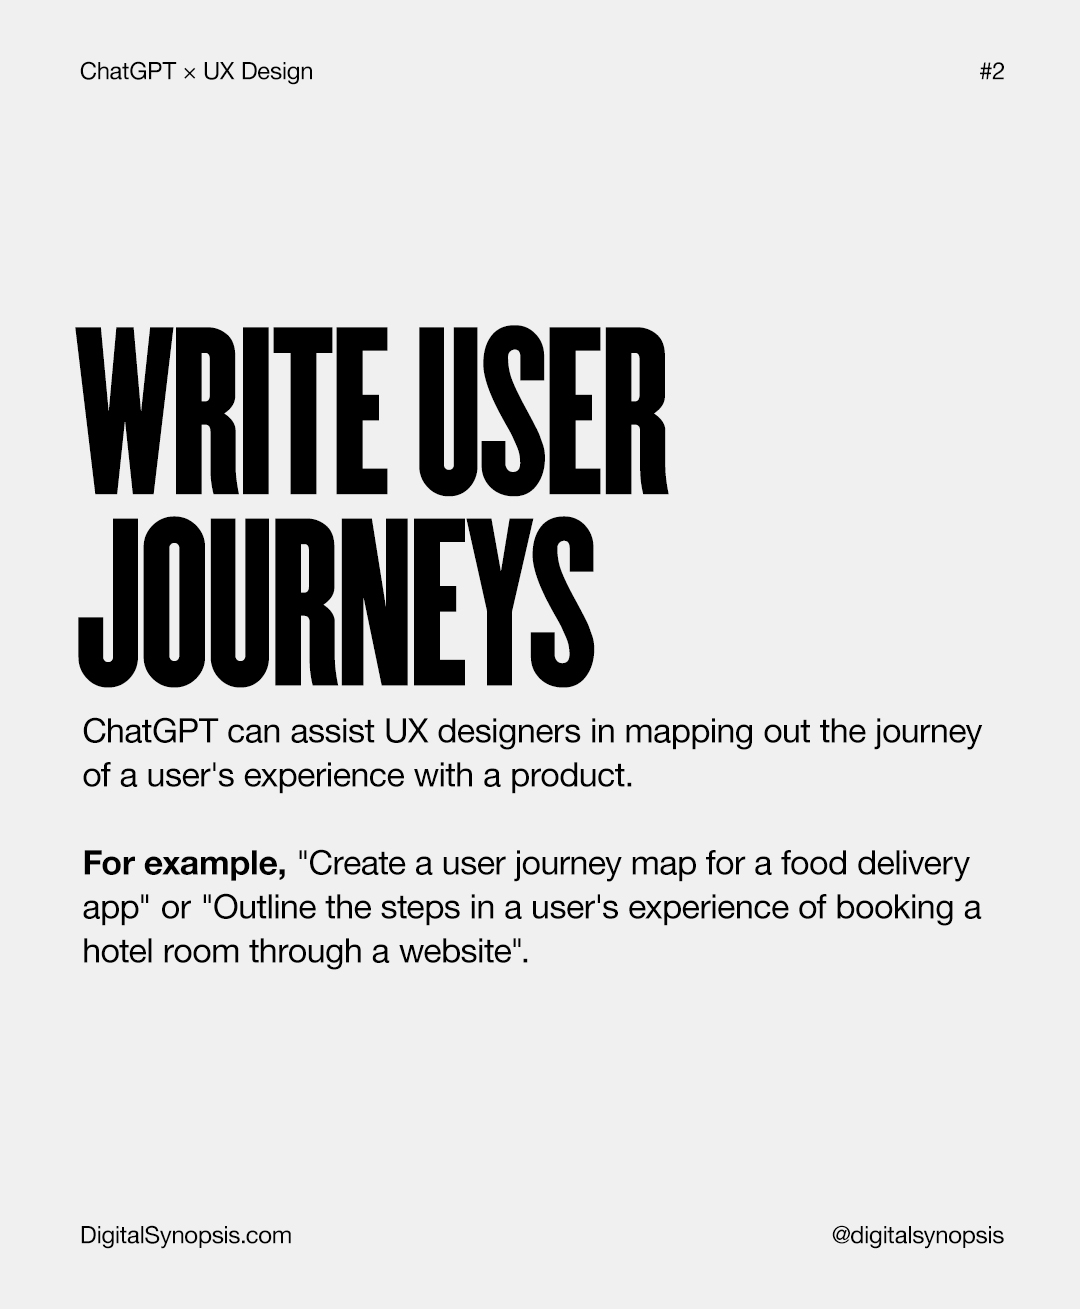 Top 10 Ways To Use ChatGPT For UX Design - Write User Journeys